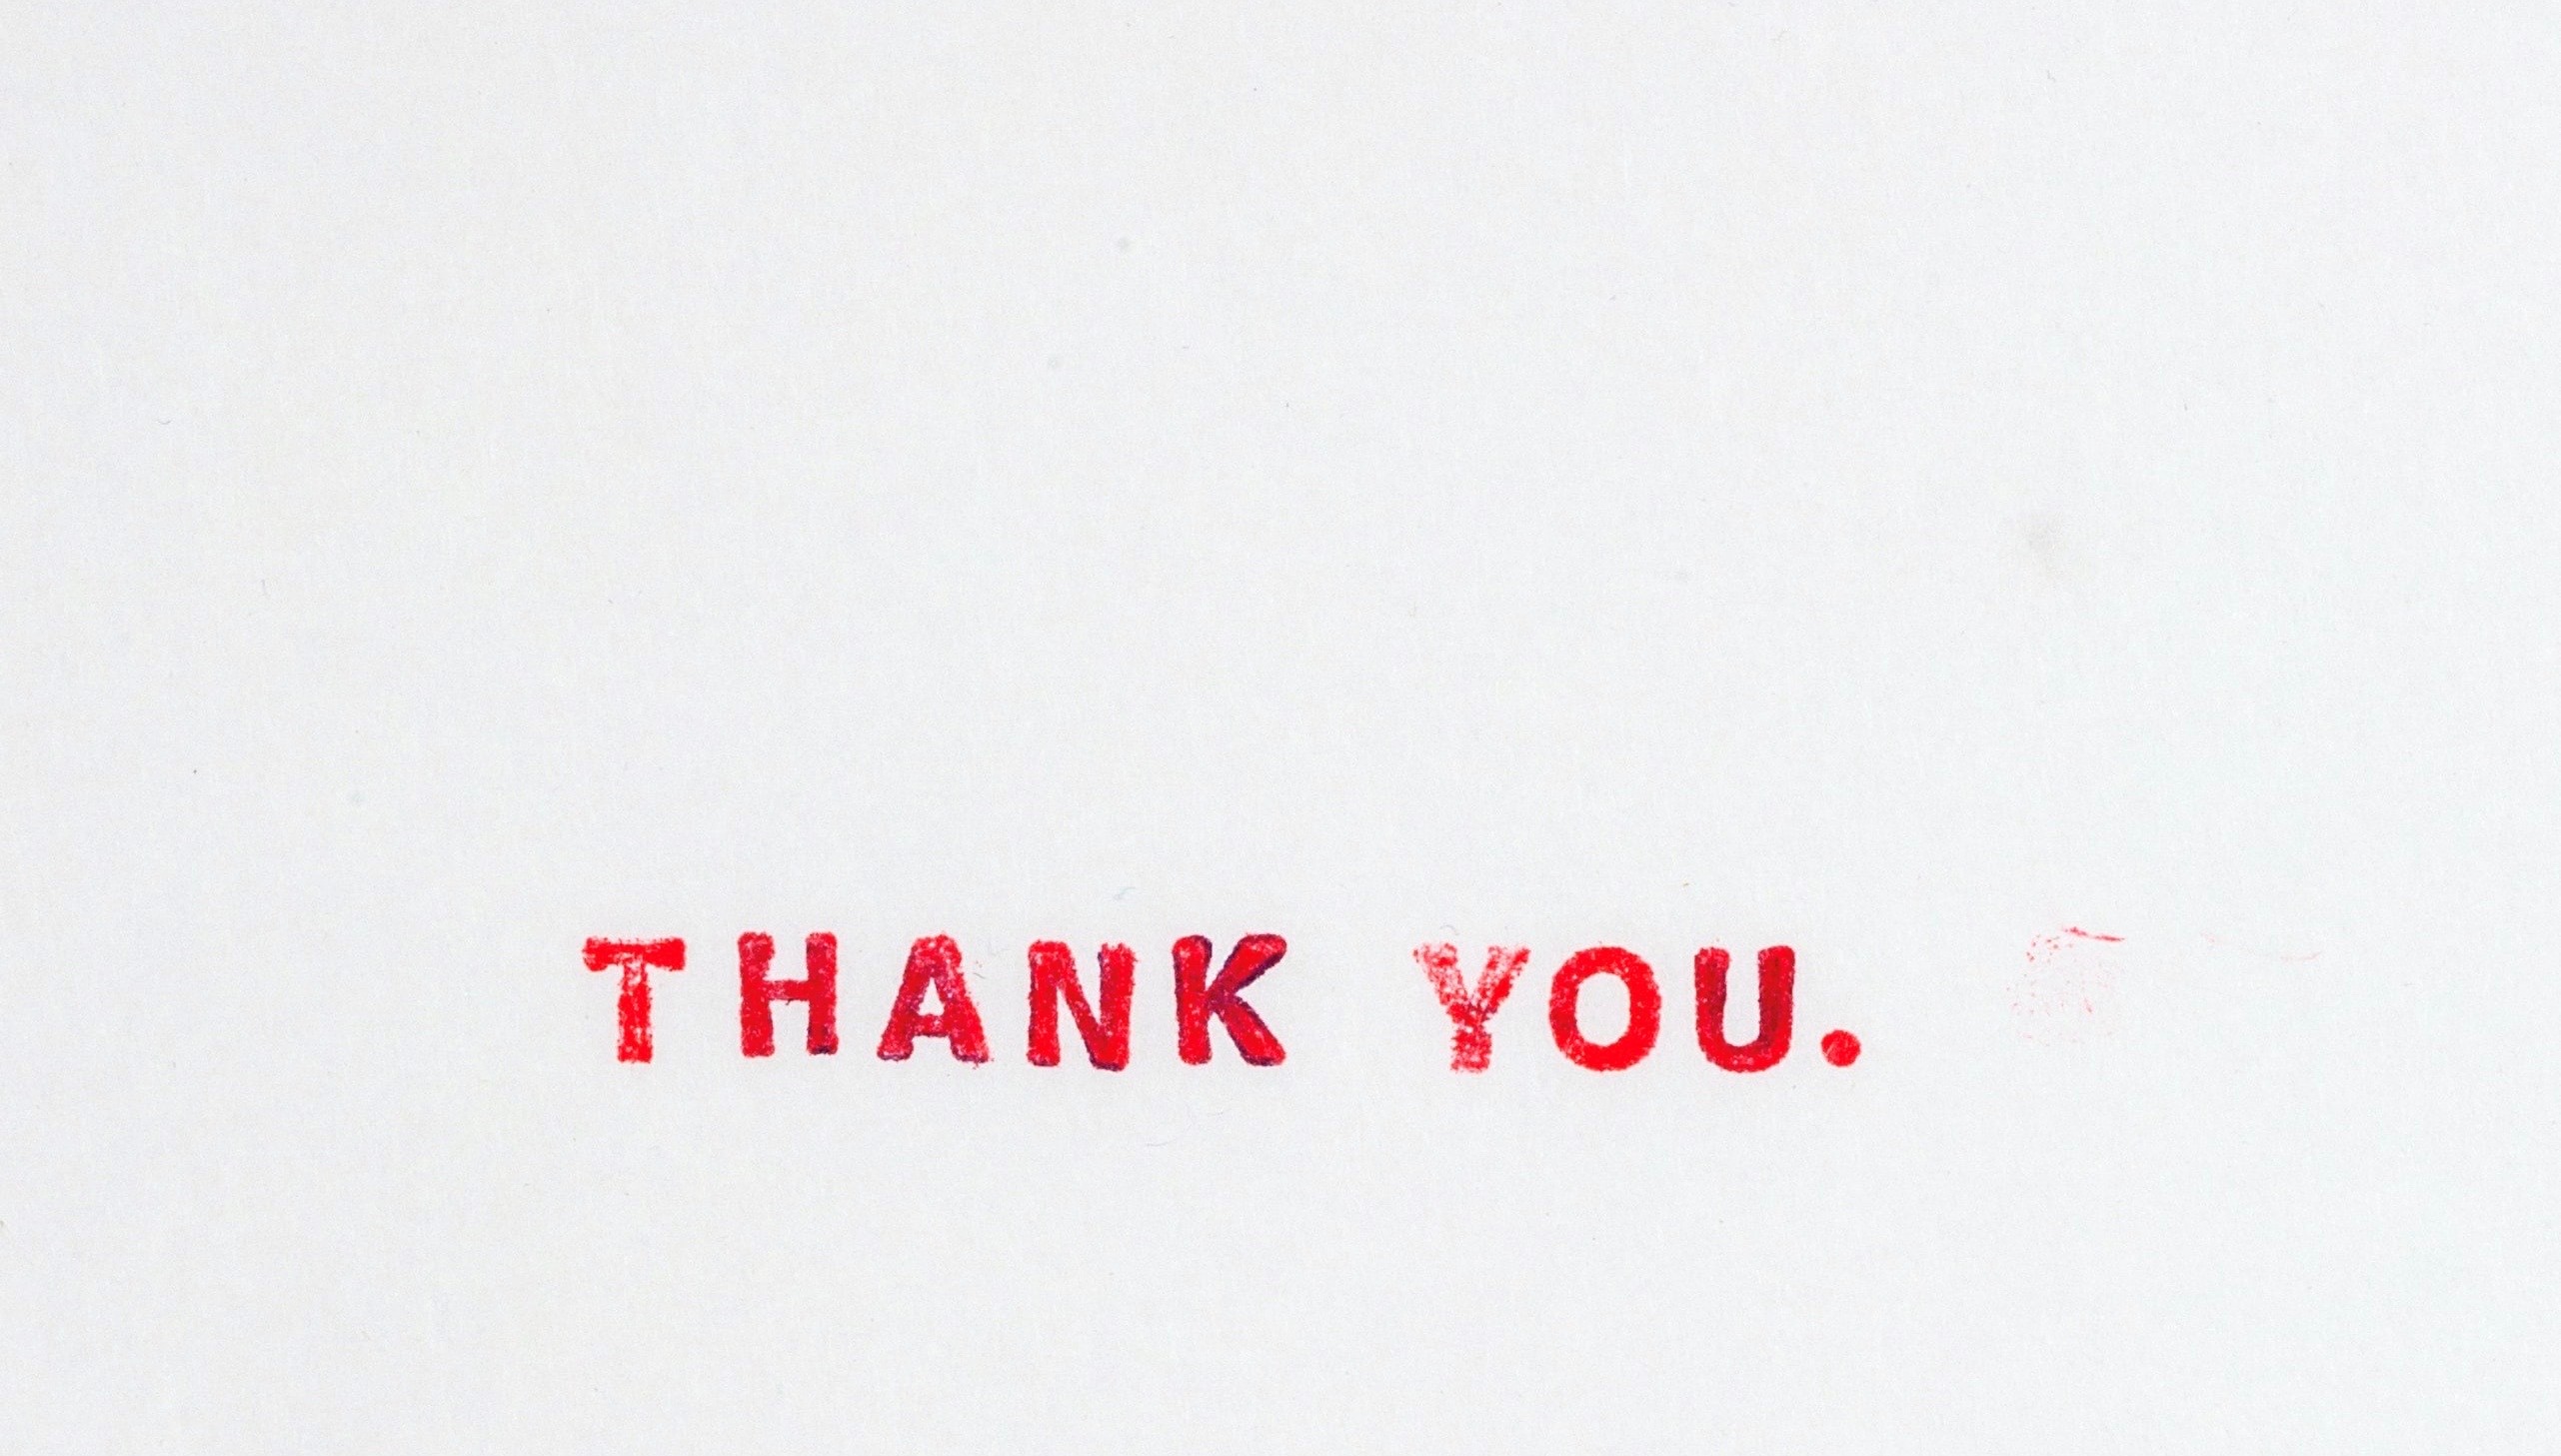 The words 'Thank You' in red font against a grey background